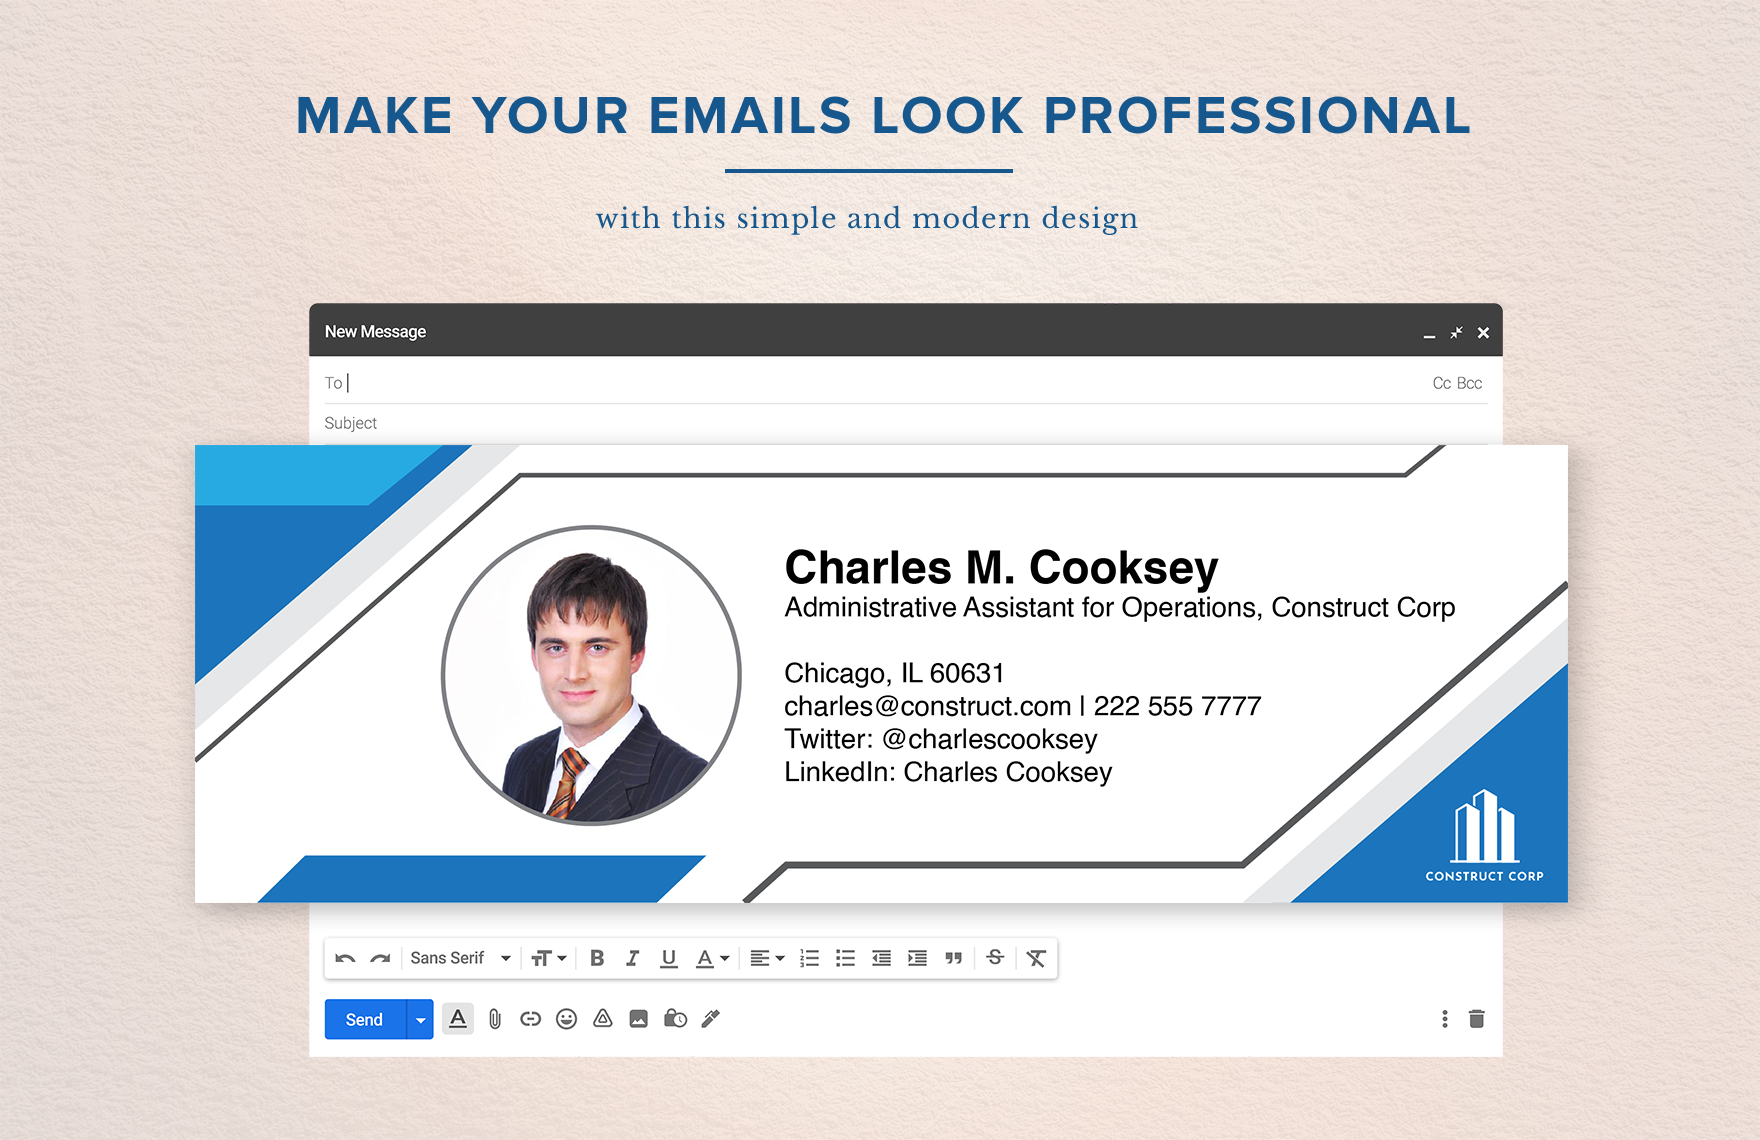 Construction Email Signature Template